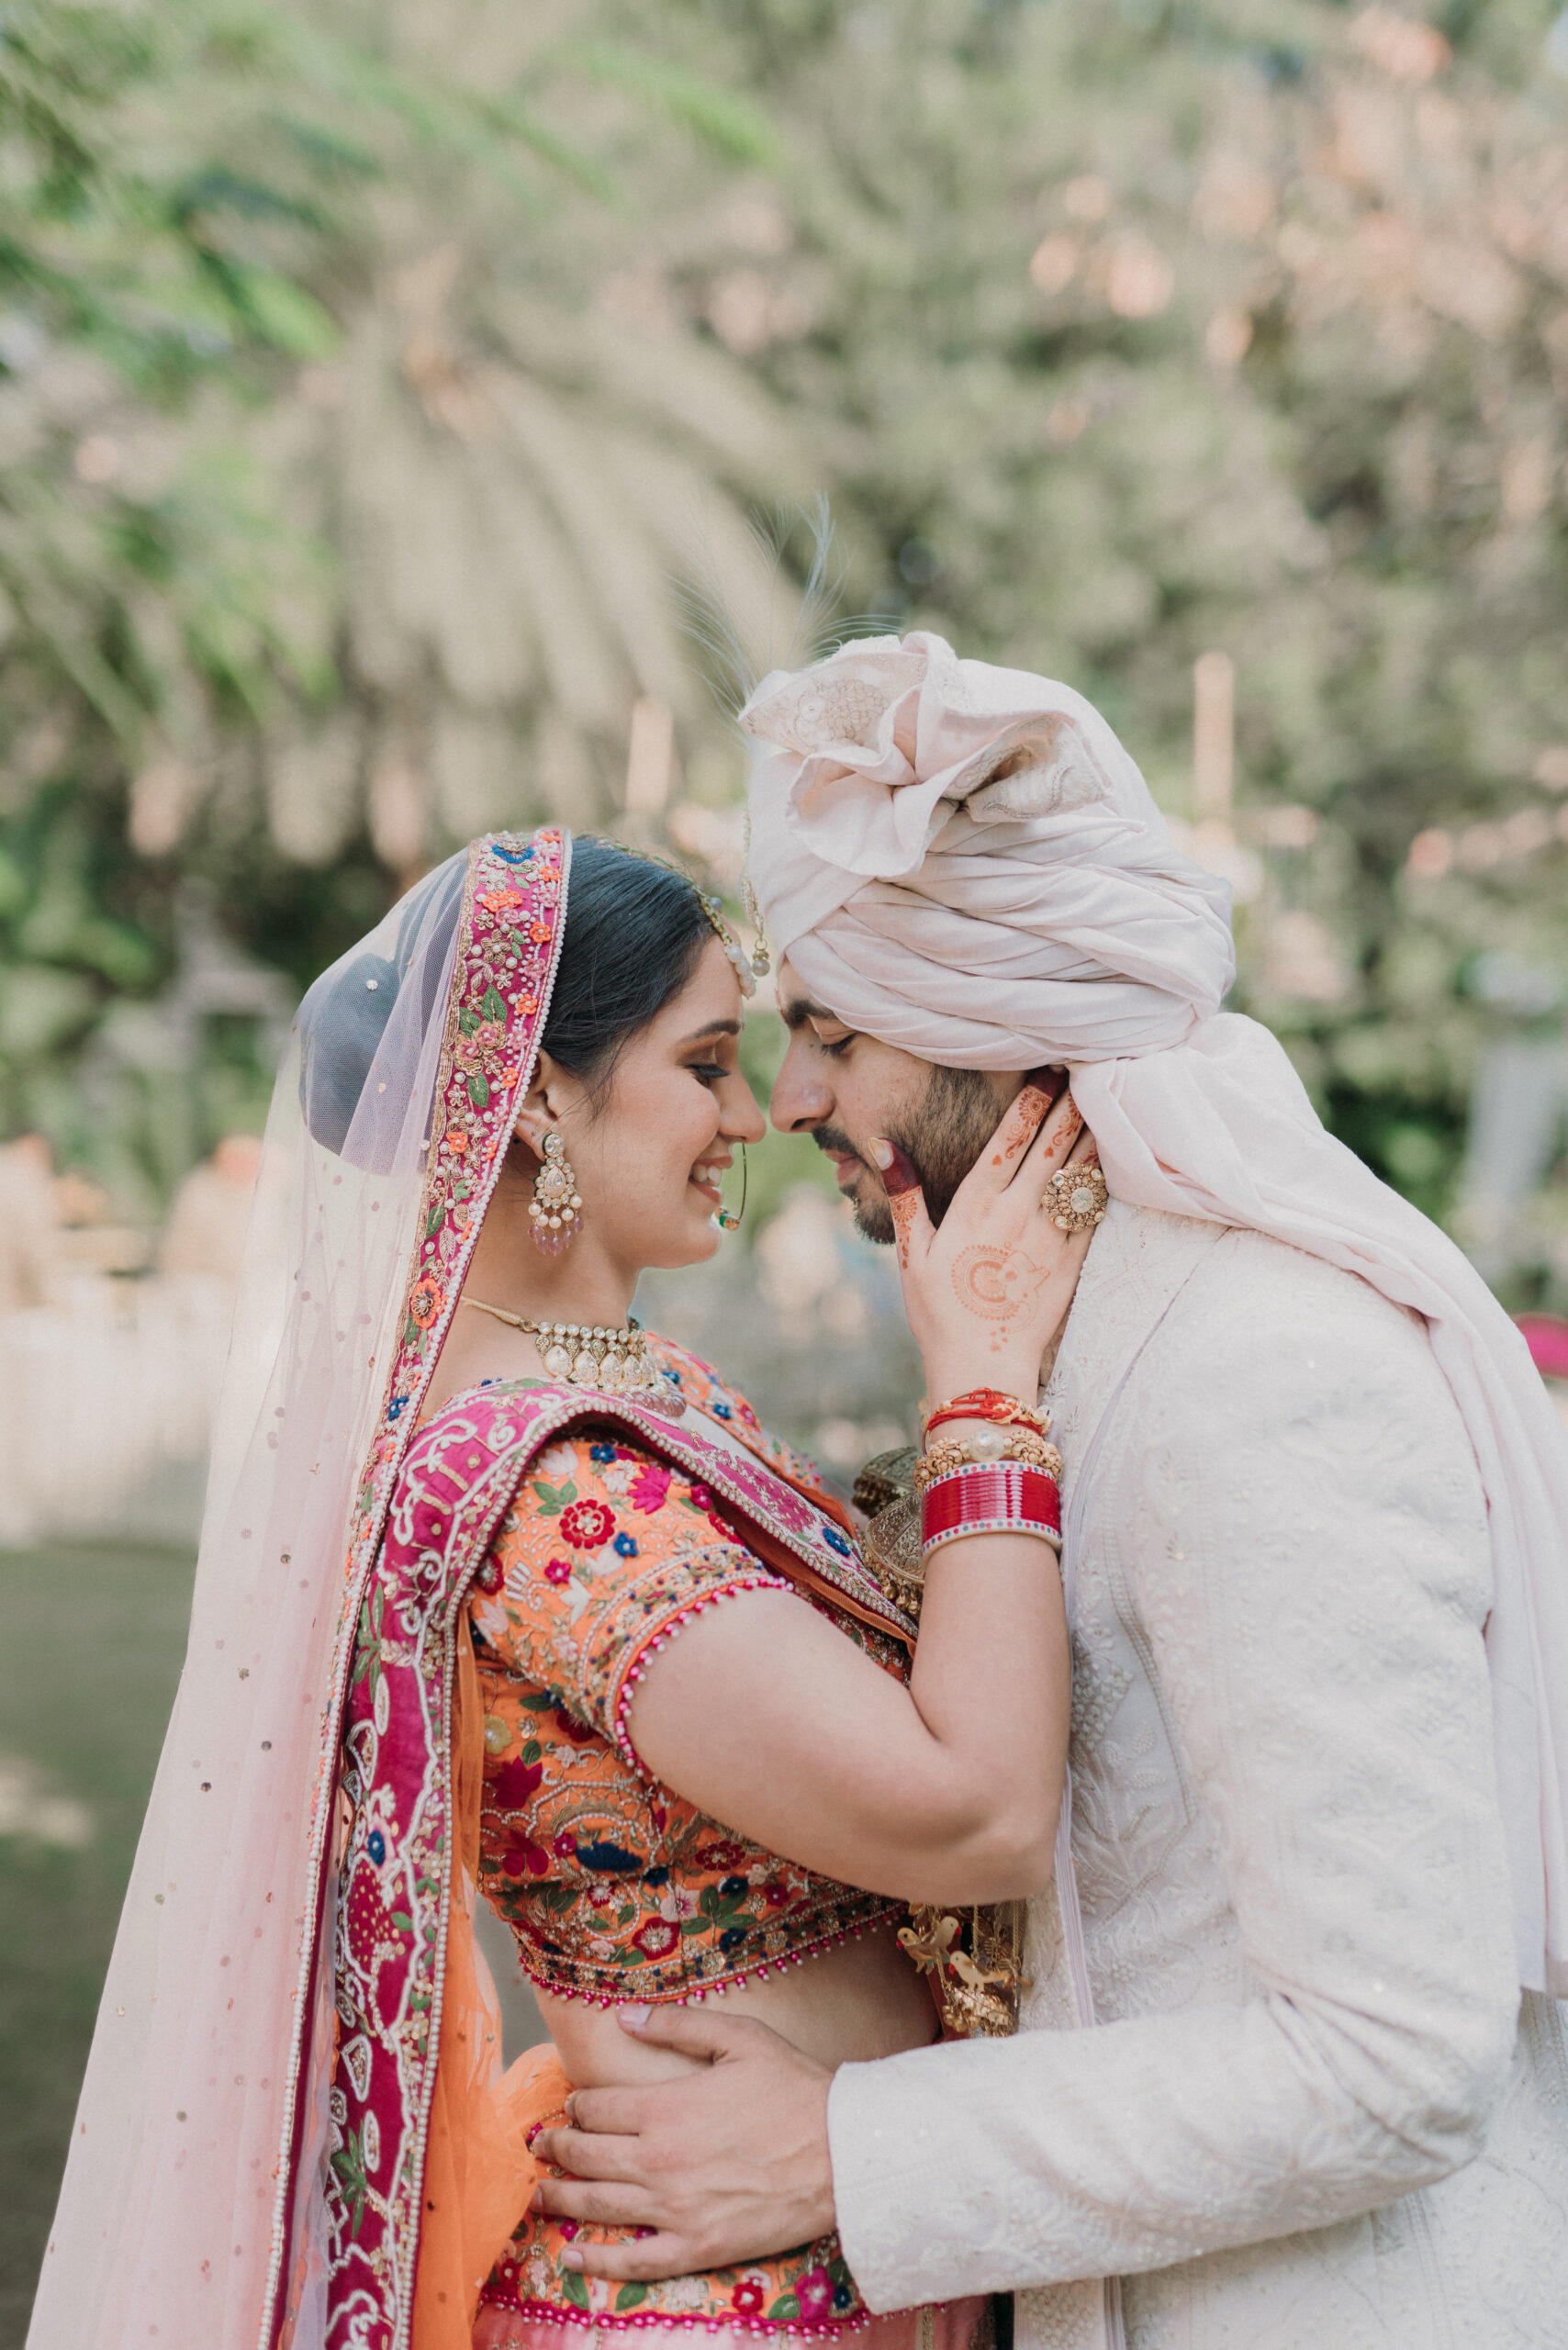 Free Photos - A Man And A Woman Are Wearing Traditional Wedding Attire,  Symbolizing Their Love And Commitment To Each Other. They Are Embracing  Each Other And Posing For A Memorable Photograph.